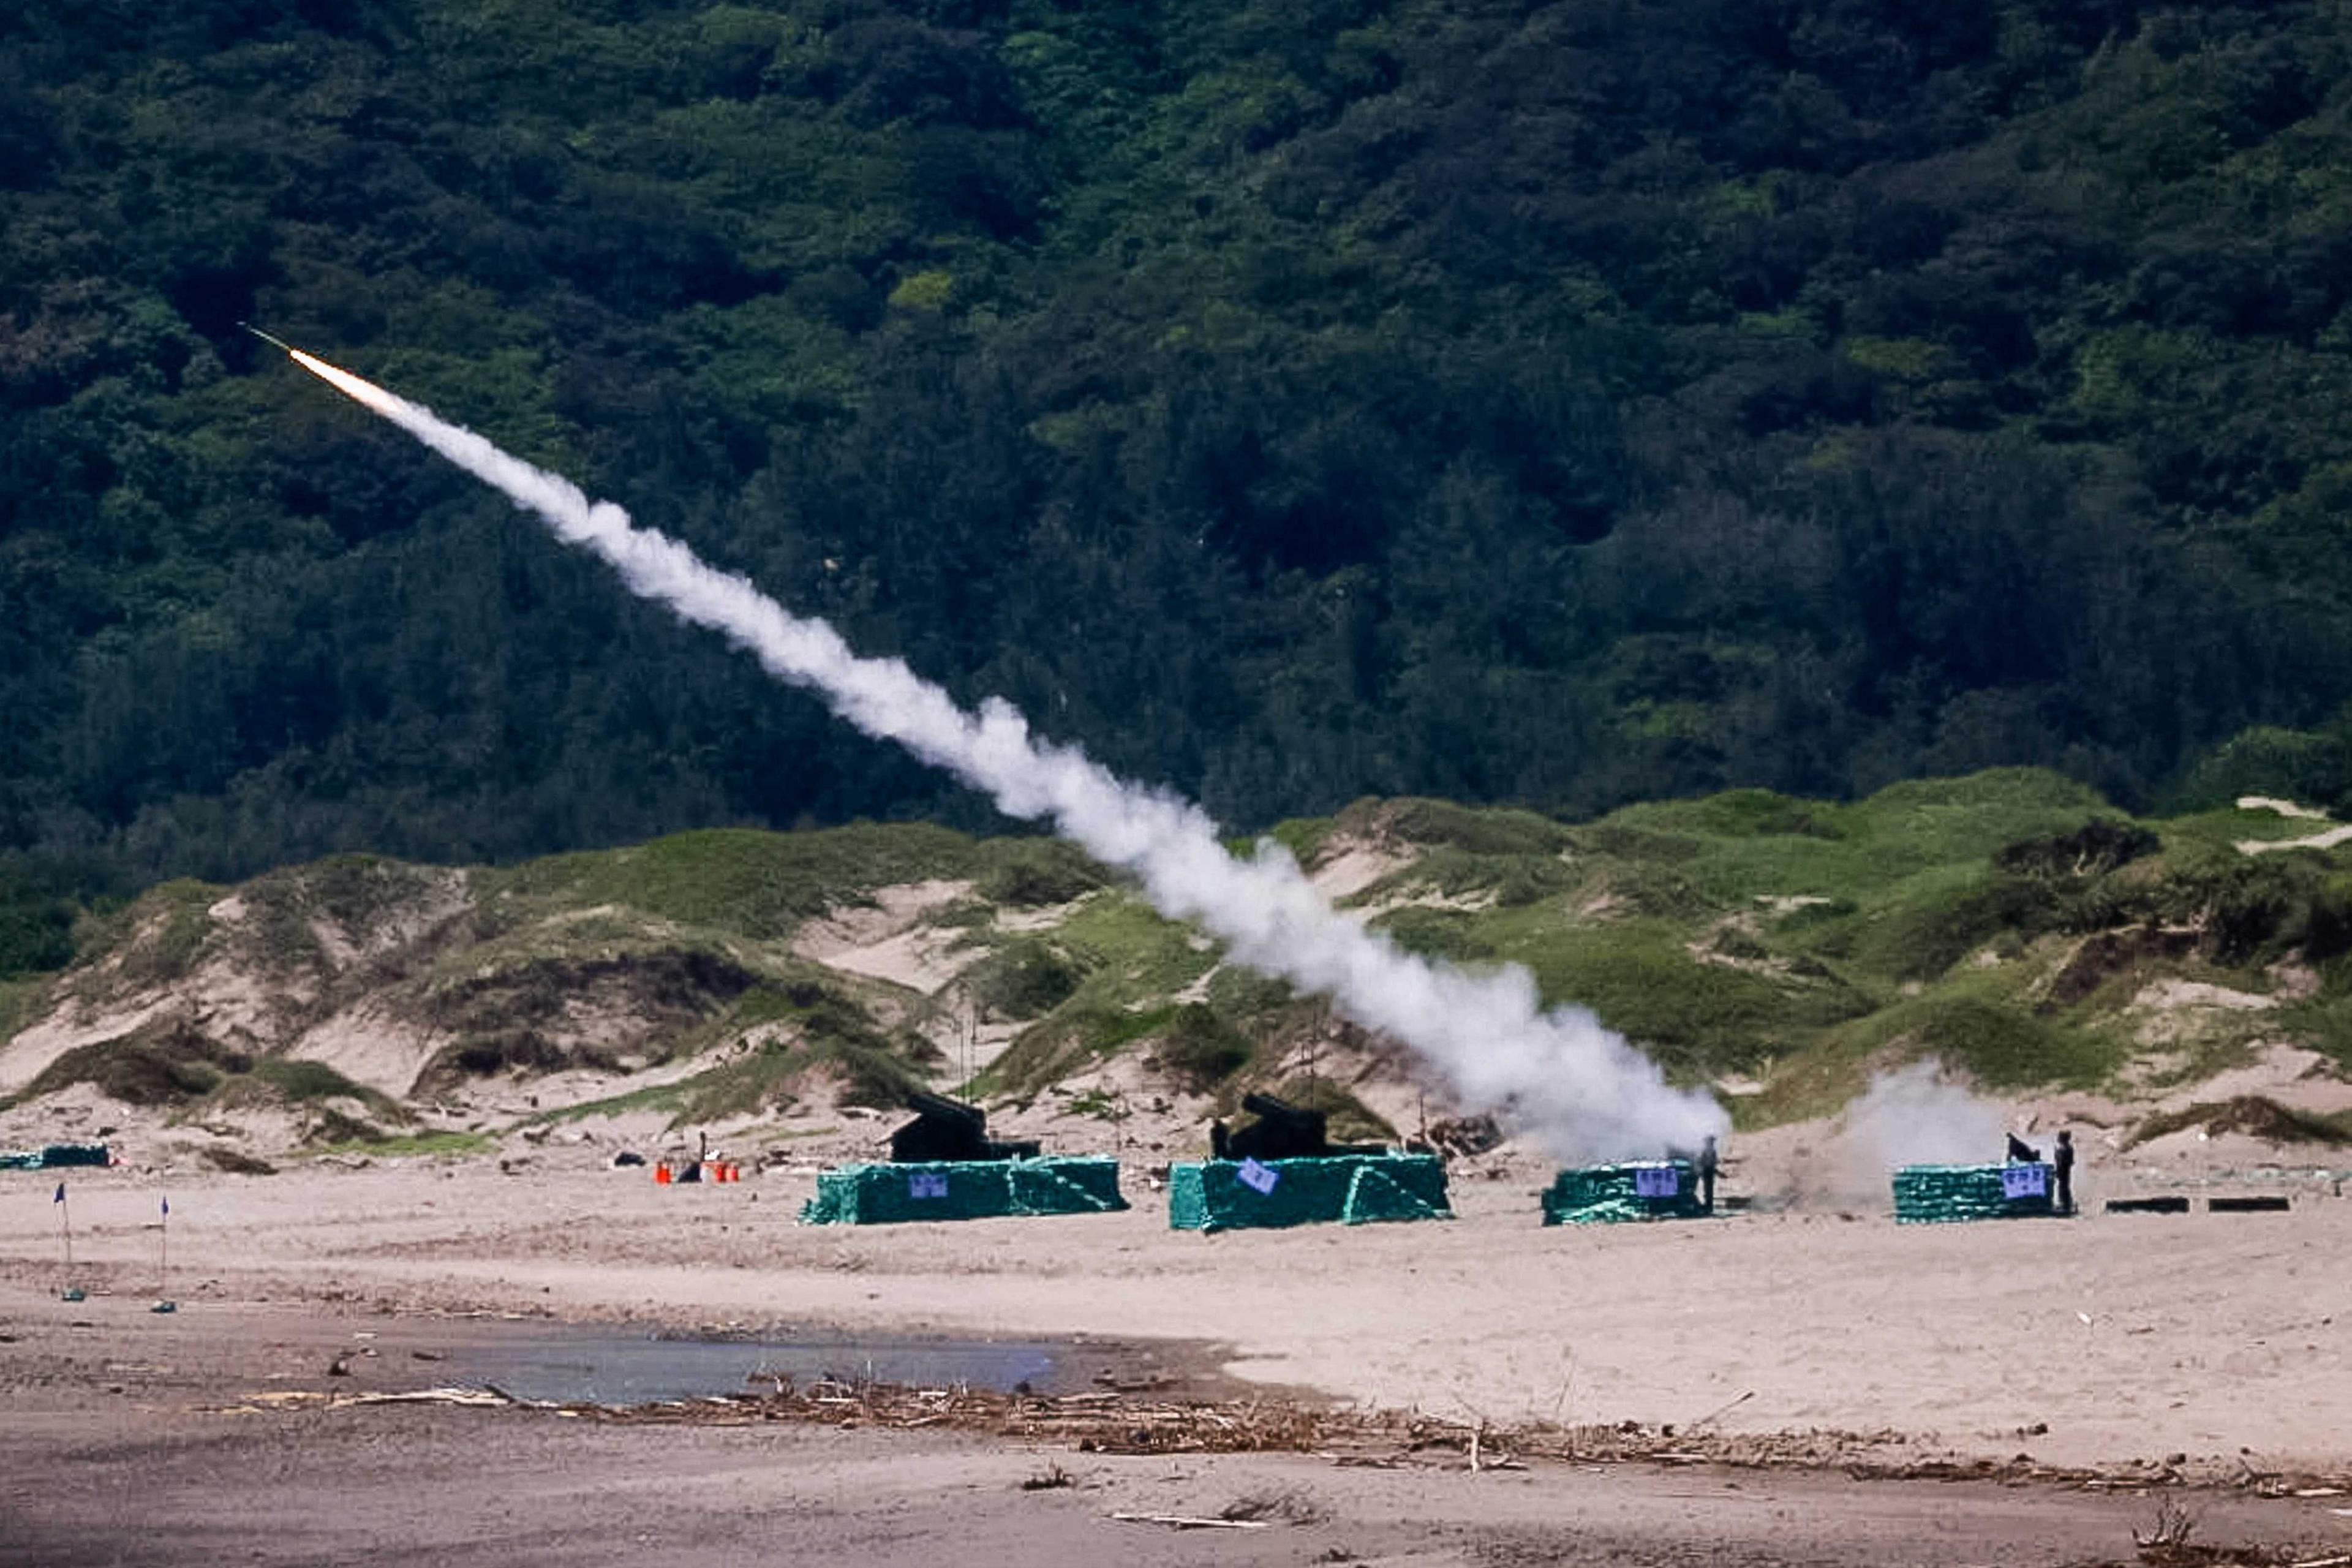 A Taiwanese military soldier launches a US made Stinger missile during a live-firing exercise in Pingtung, Taiwan July 4. Photo: Reuters